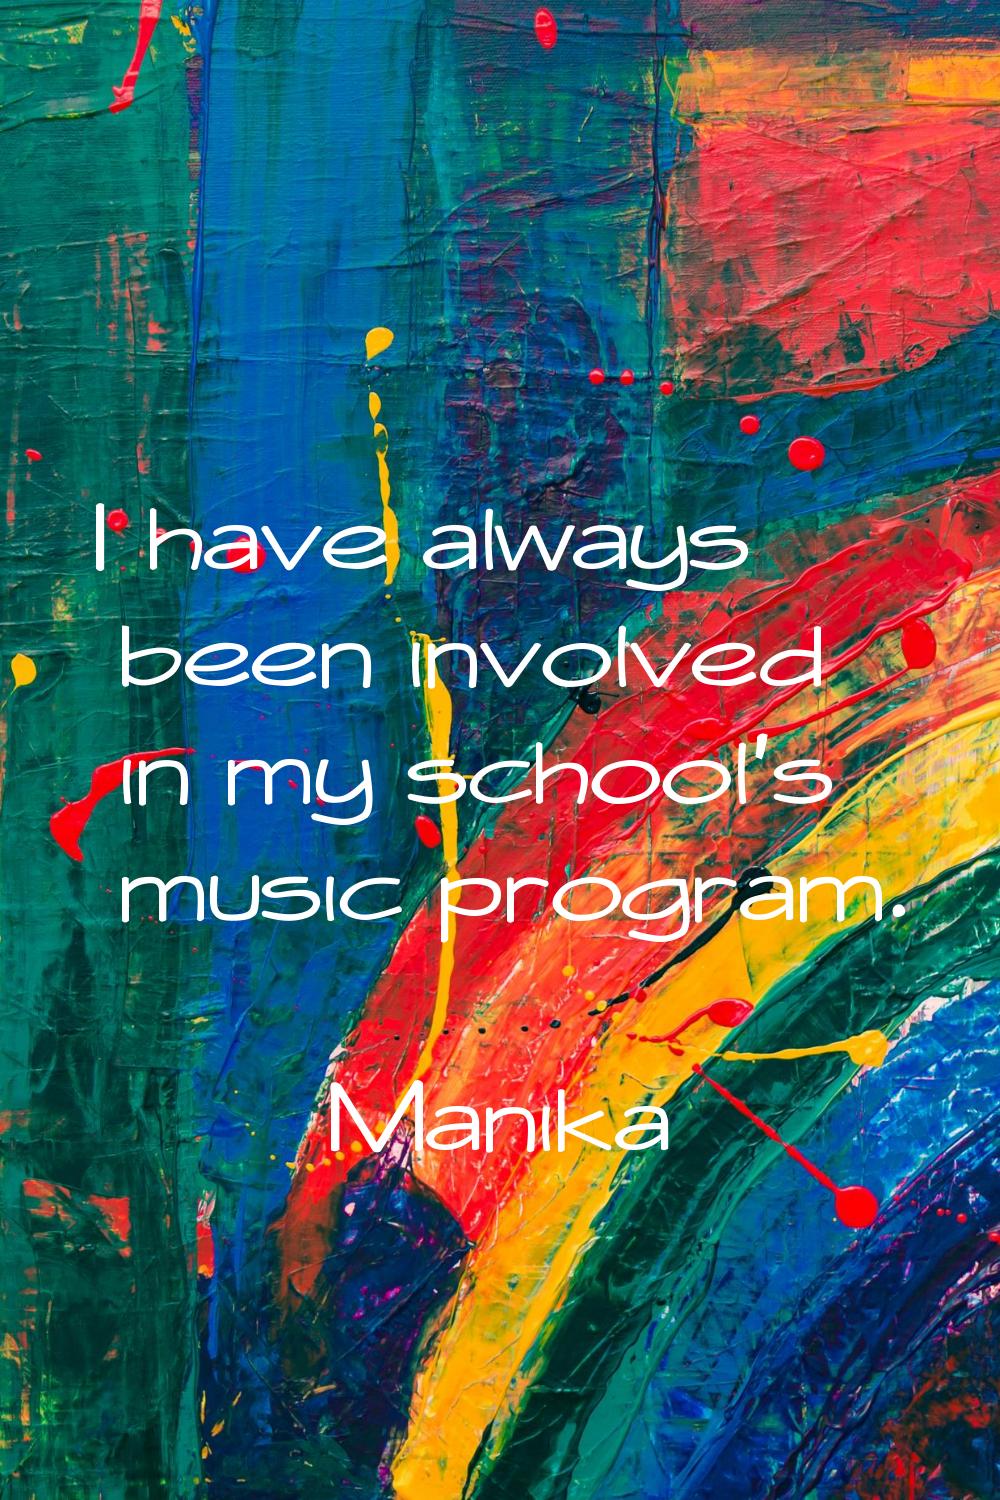 I have always been involved in my school's music program.